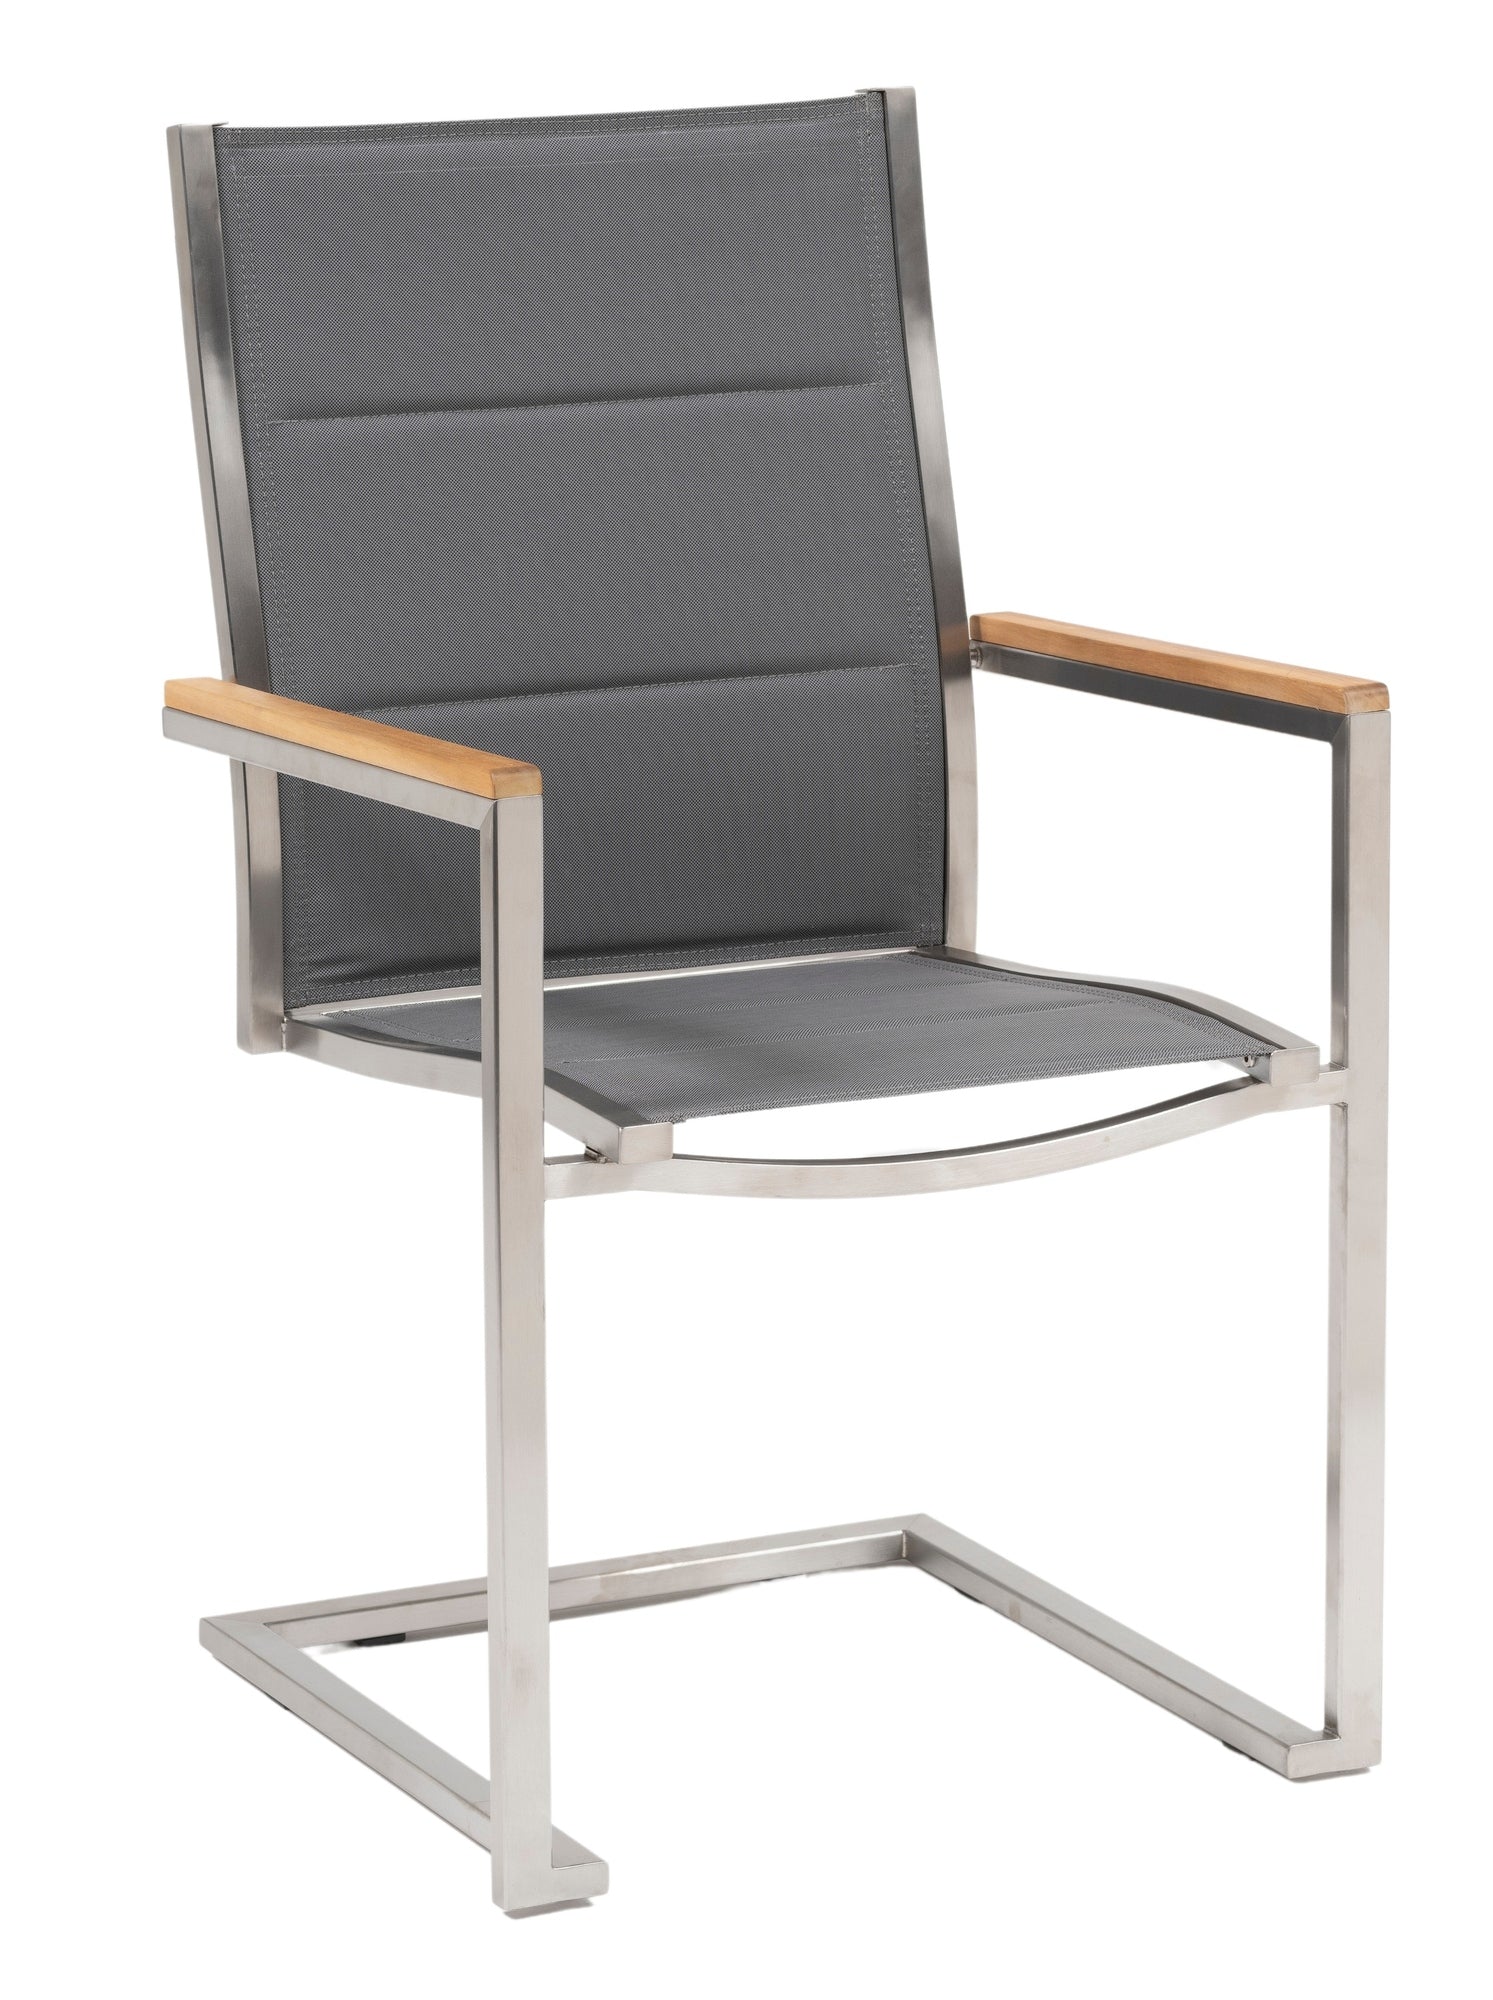 Gino - cantilever chair